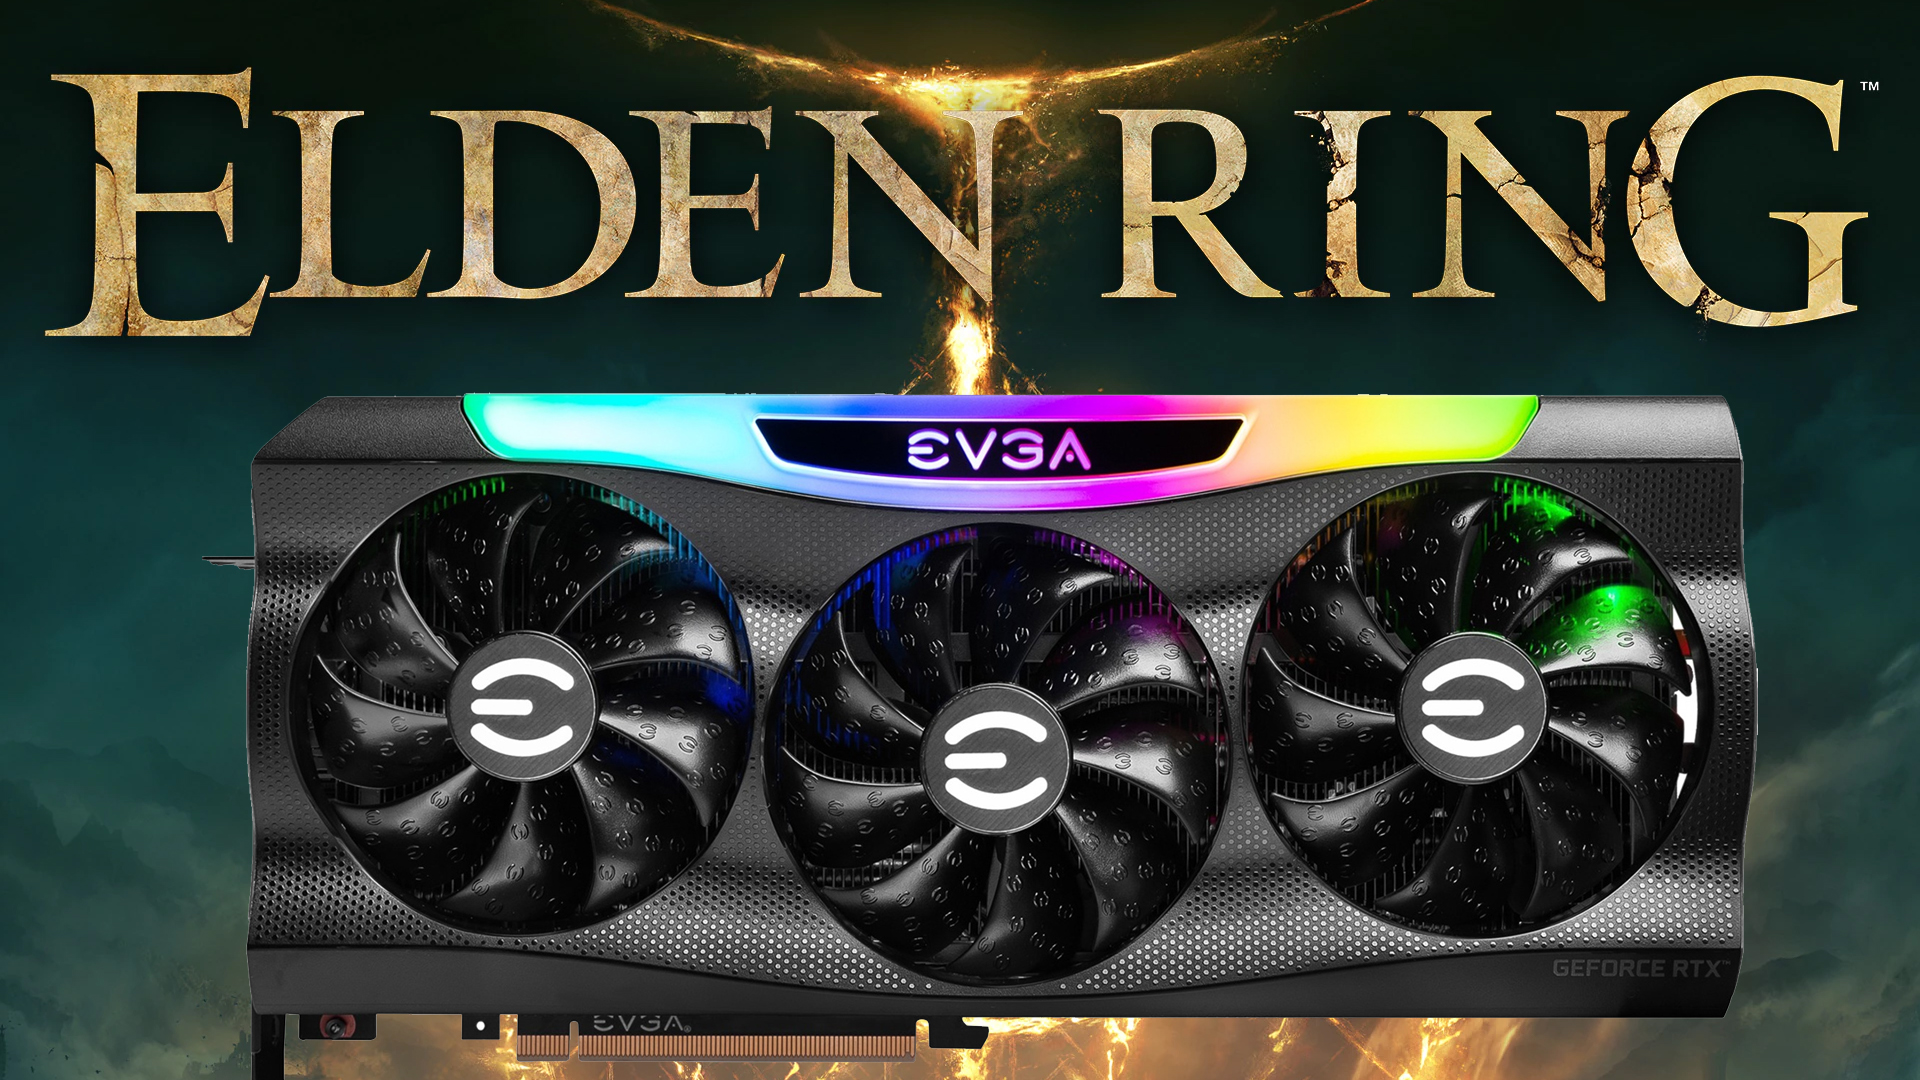 Elden Ring System Requirements and Features: What to Expect?